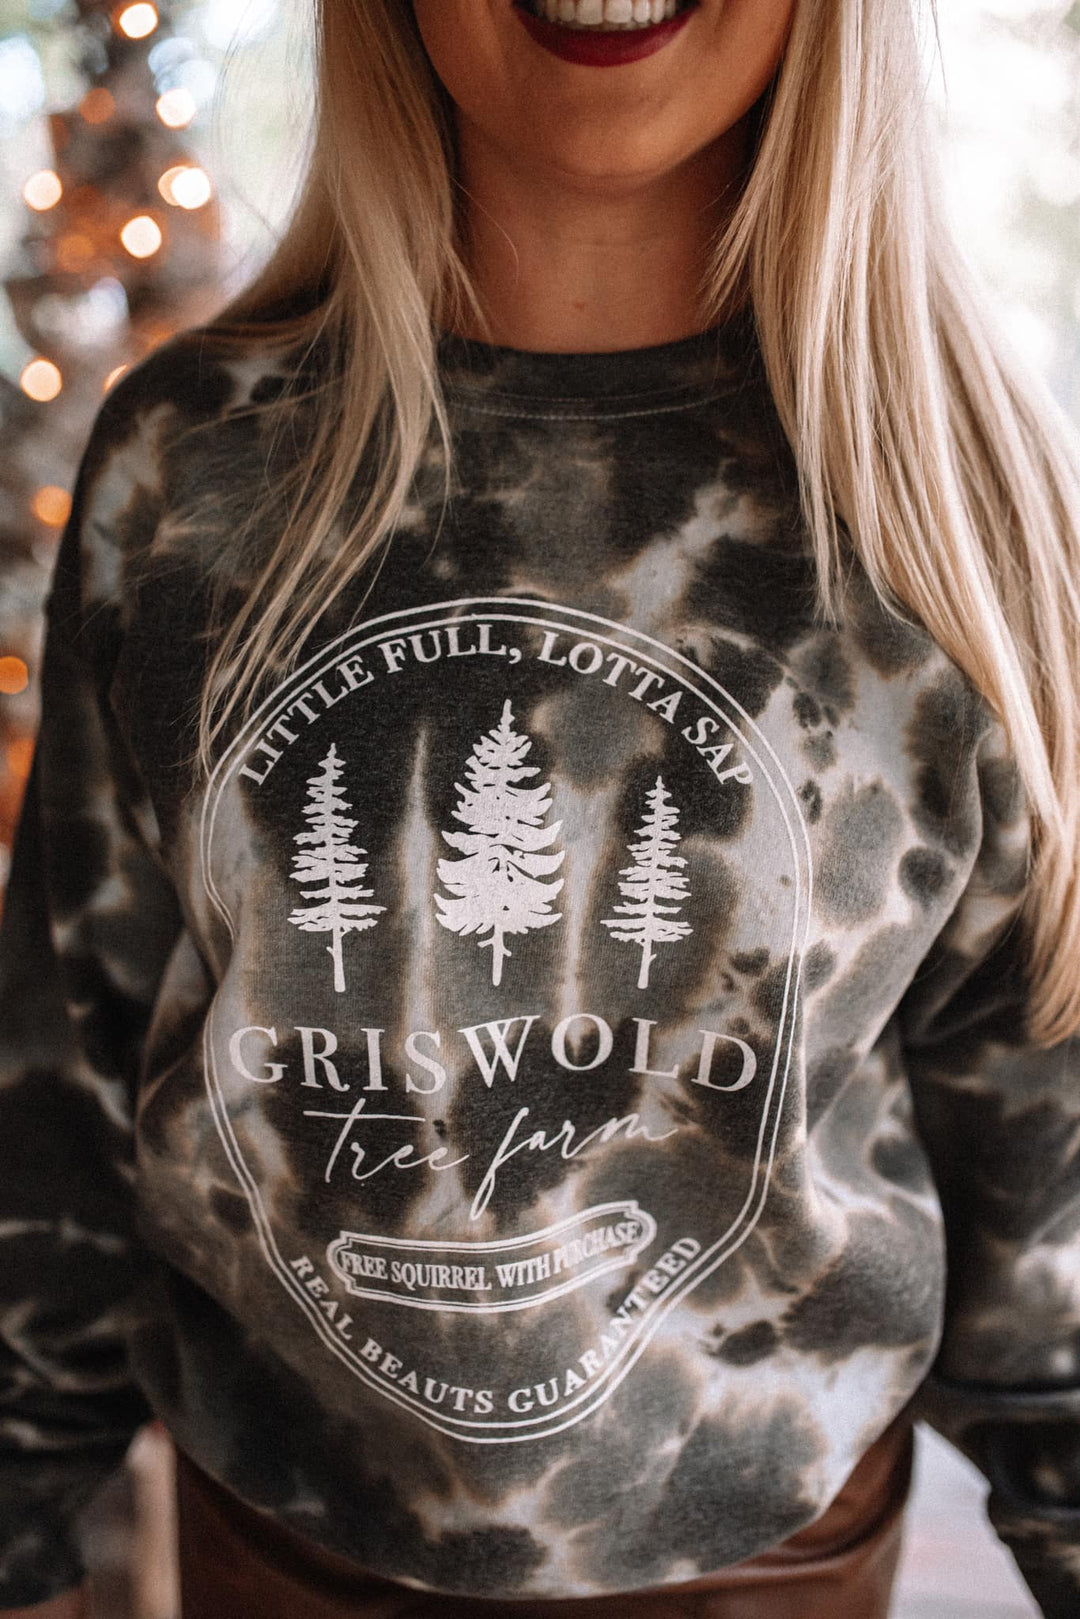 PREORDER | Griswold Tree Farm